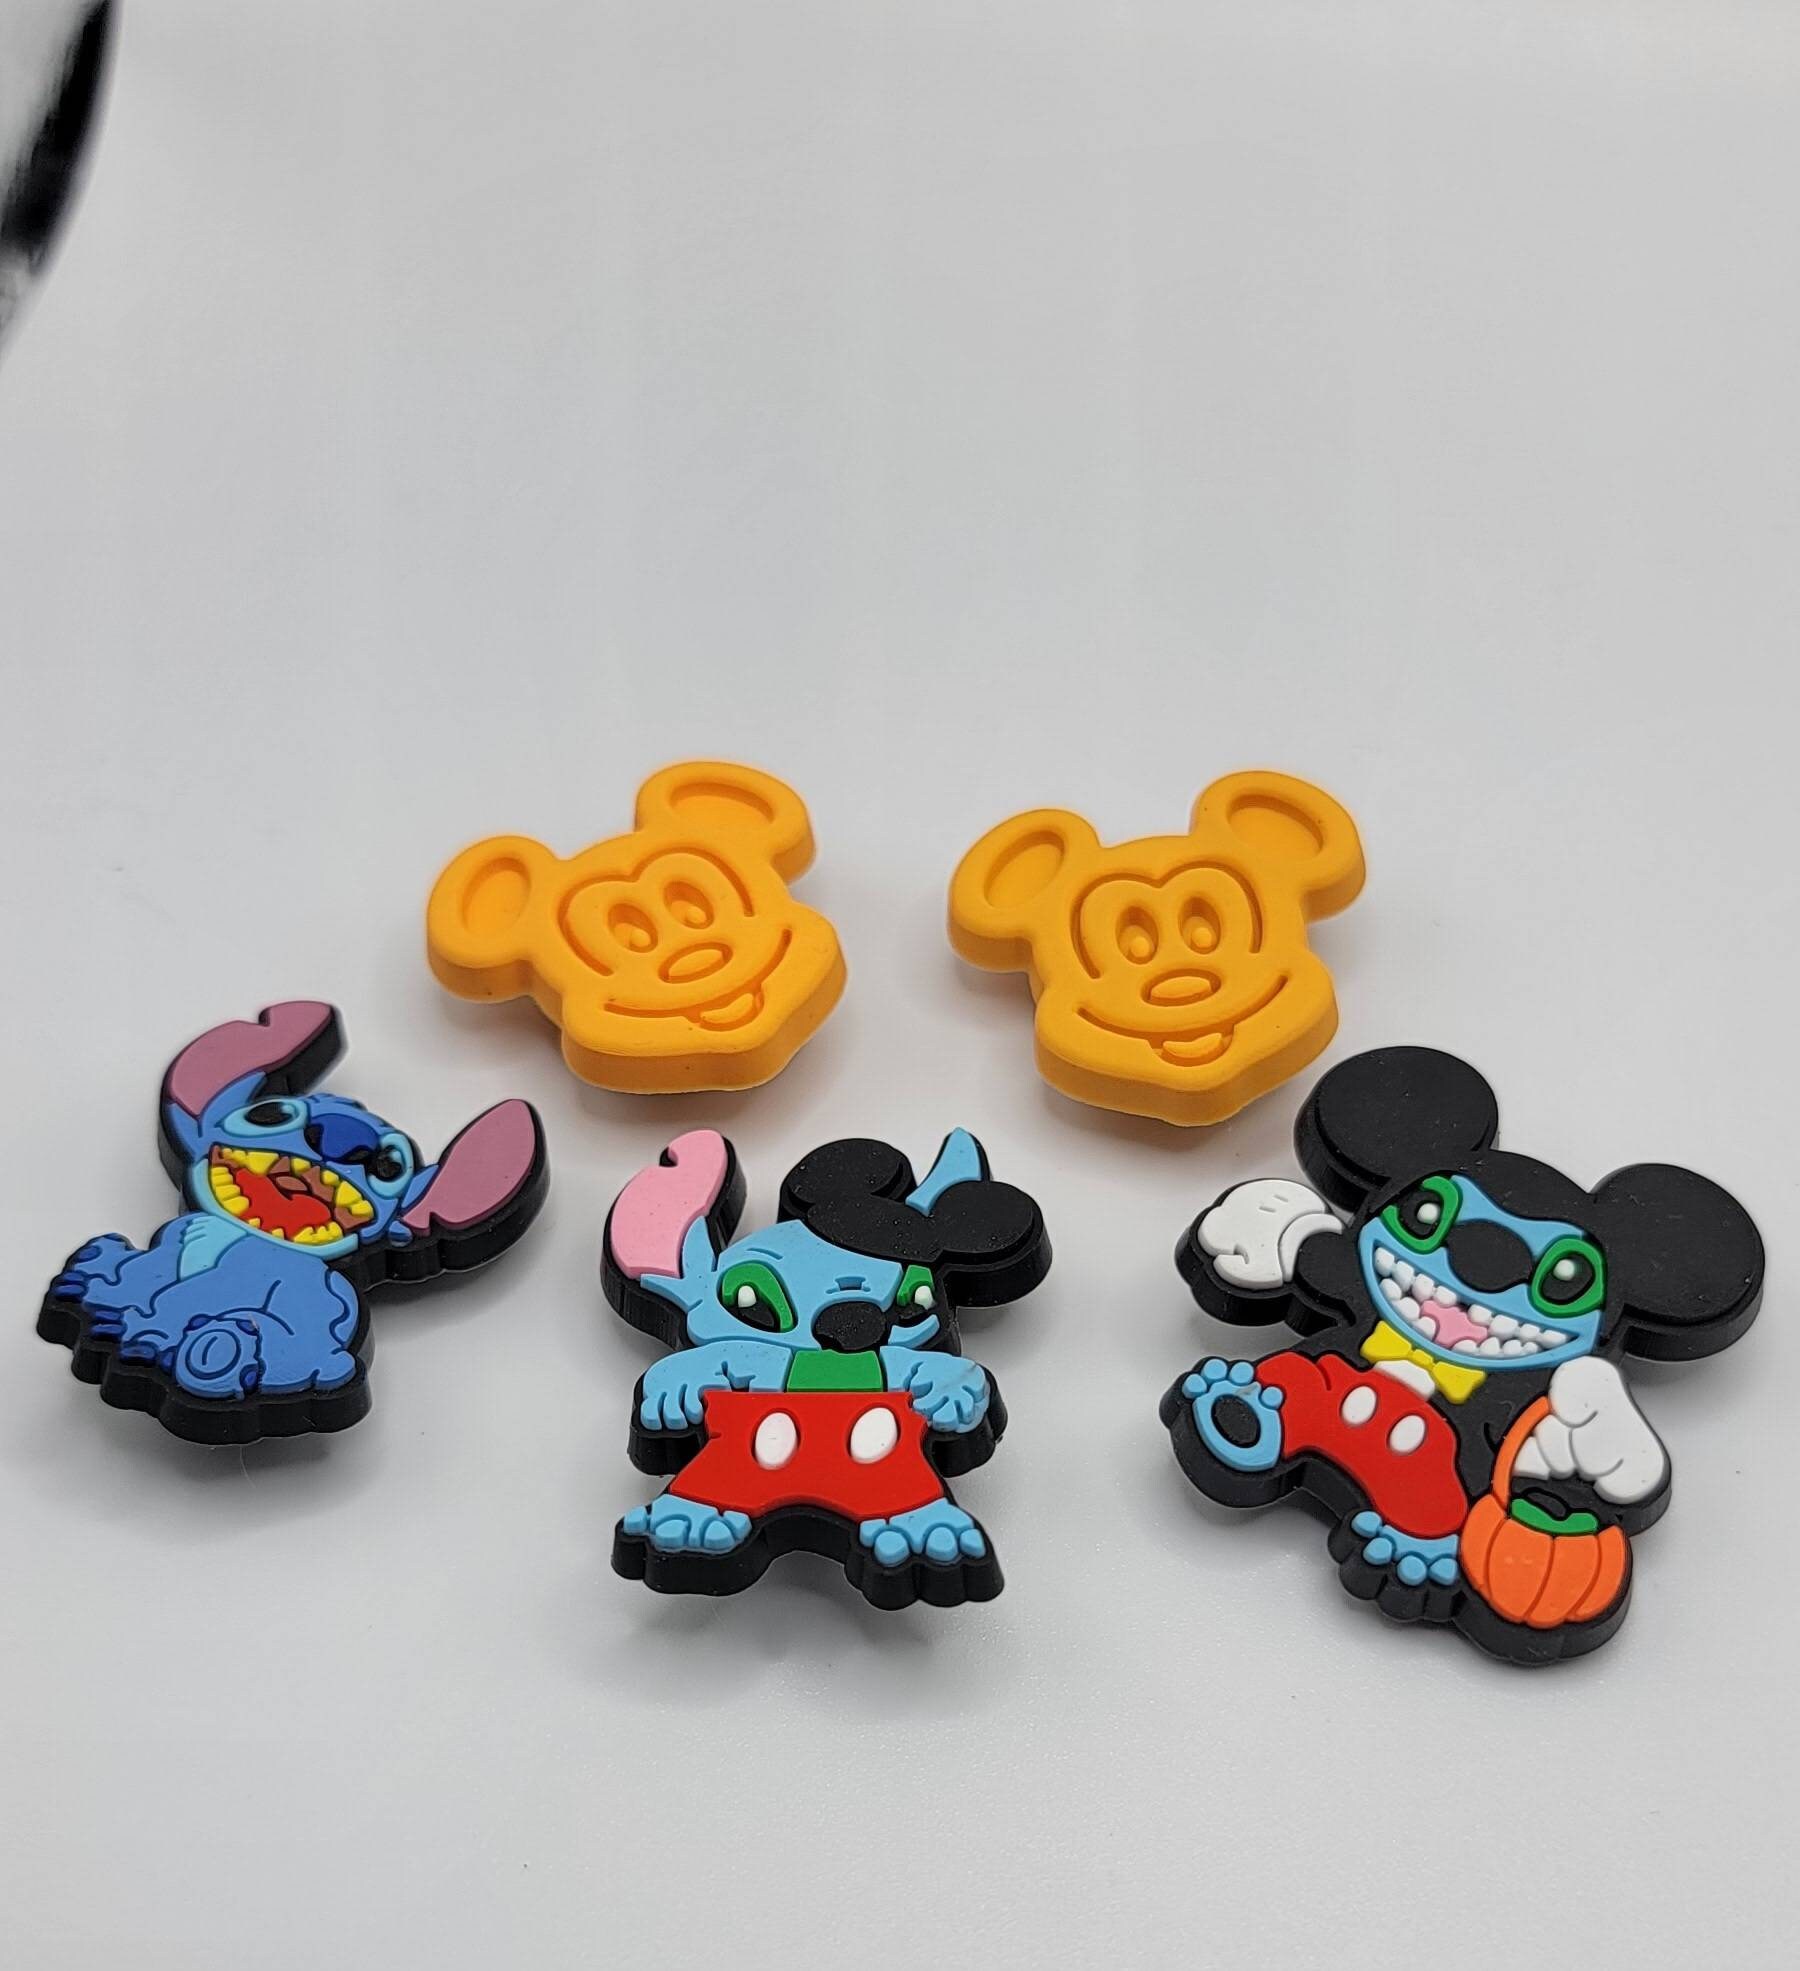 Mickey Horror Crco Charms #foryoupage #foryou #fyp #smallbusiness